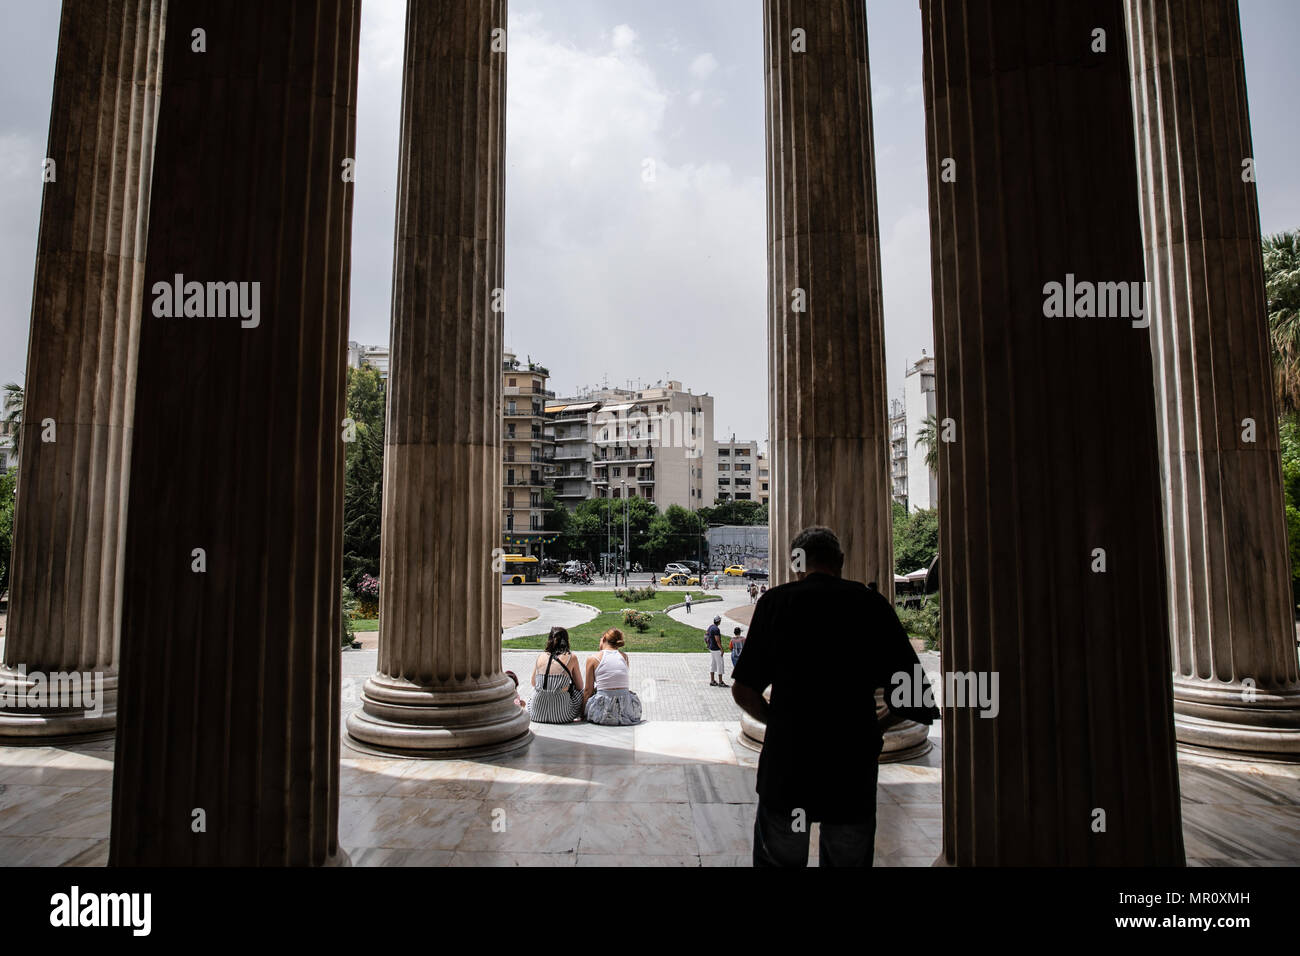 Athens. 23rd May, 2018. Picture taken on May 23, 2018 shows the columns of the National Archaeological Museum in Athens, Greece. Located in the center of Athens, the National Archaeological Museum houses more than 20,000 exhibits, including the world's finest collection of Greek antiquities. Credit: Lefteris Partsalis/Xinhua/Alamy Live News Stock Photo